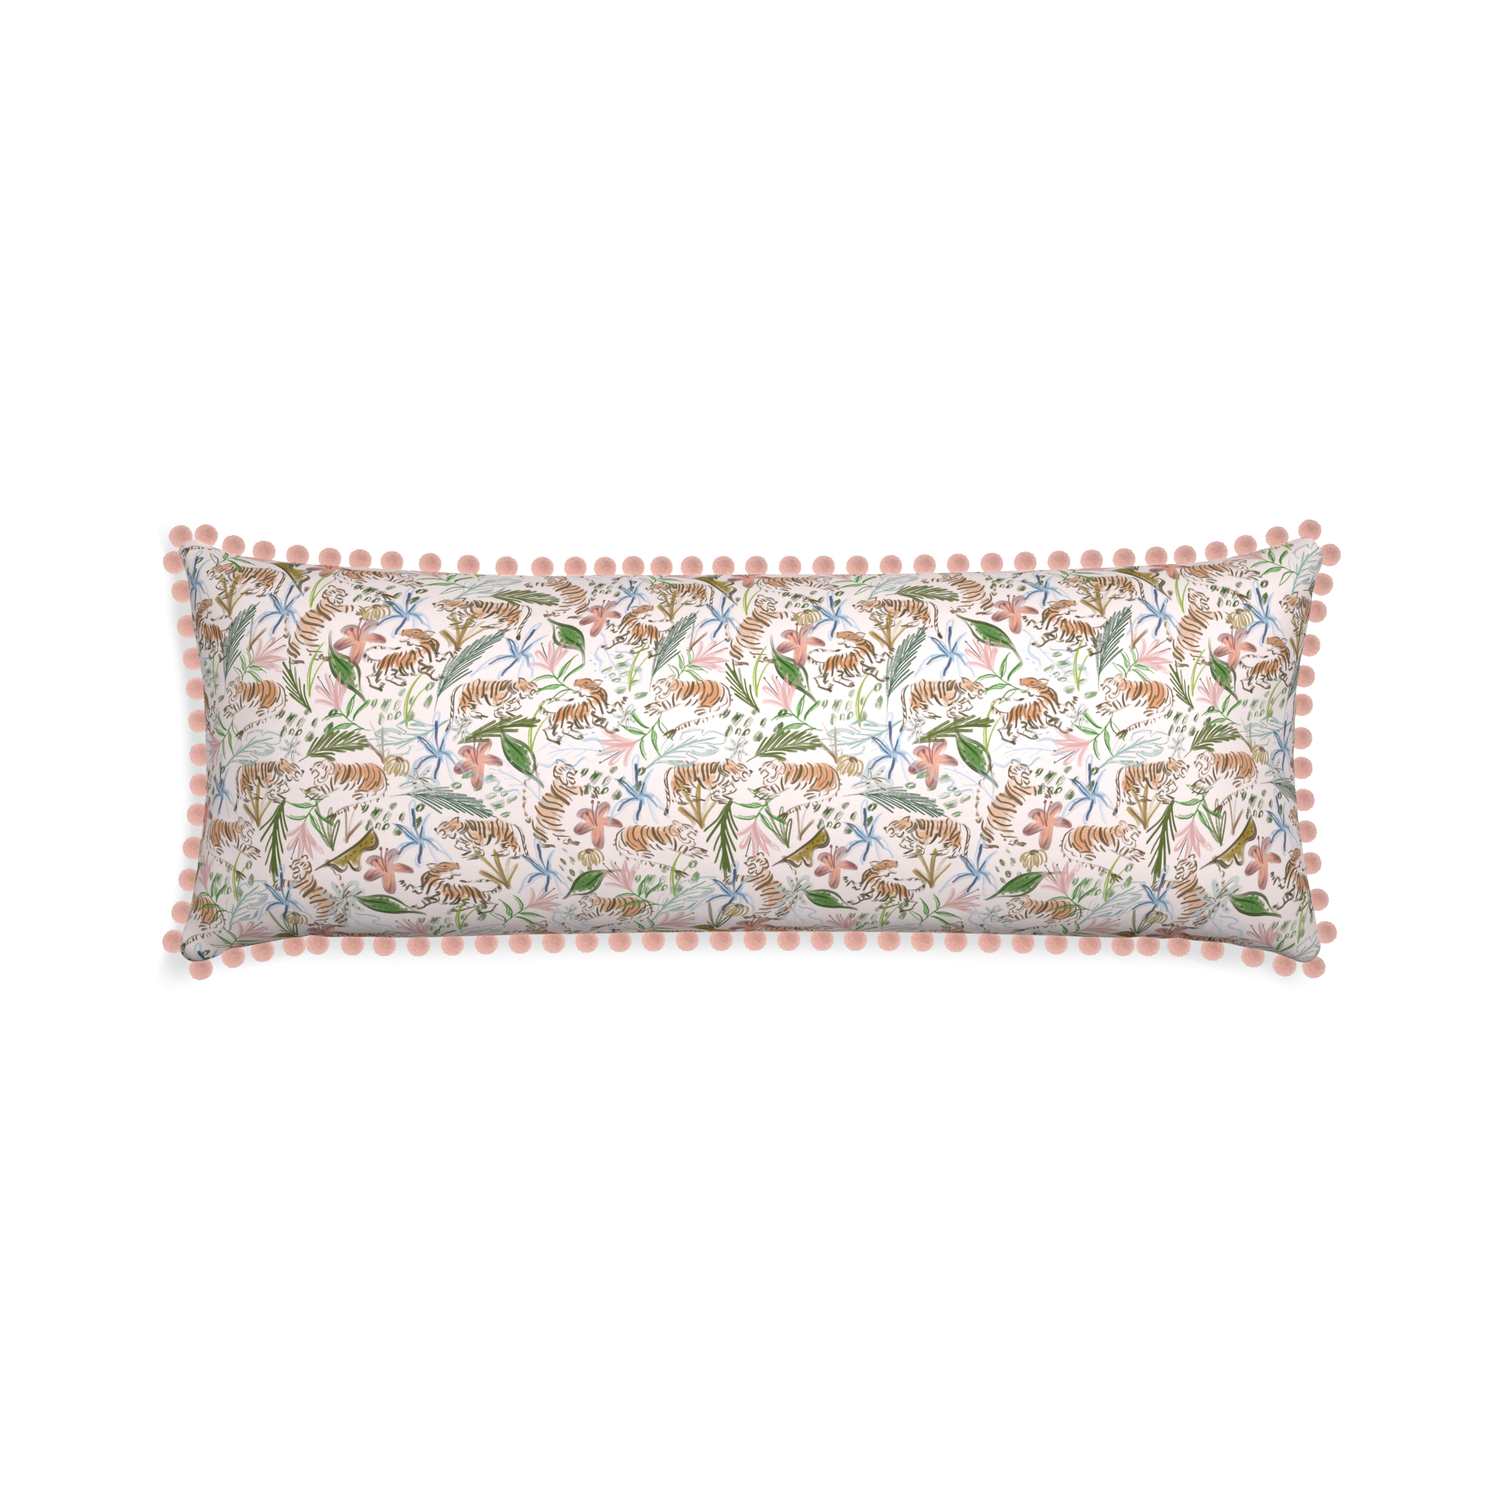 Xl-lumbar frida pink custom pink chinoiserie tigerpillow with rose pom pom on white background